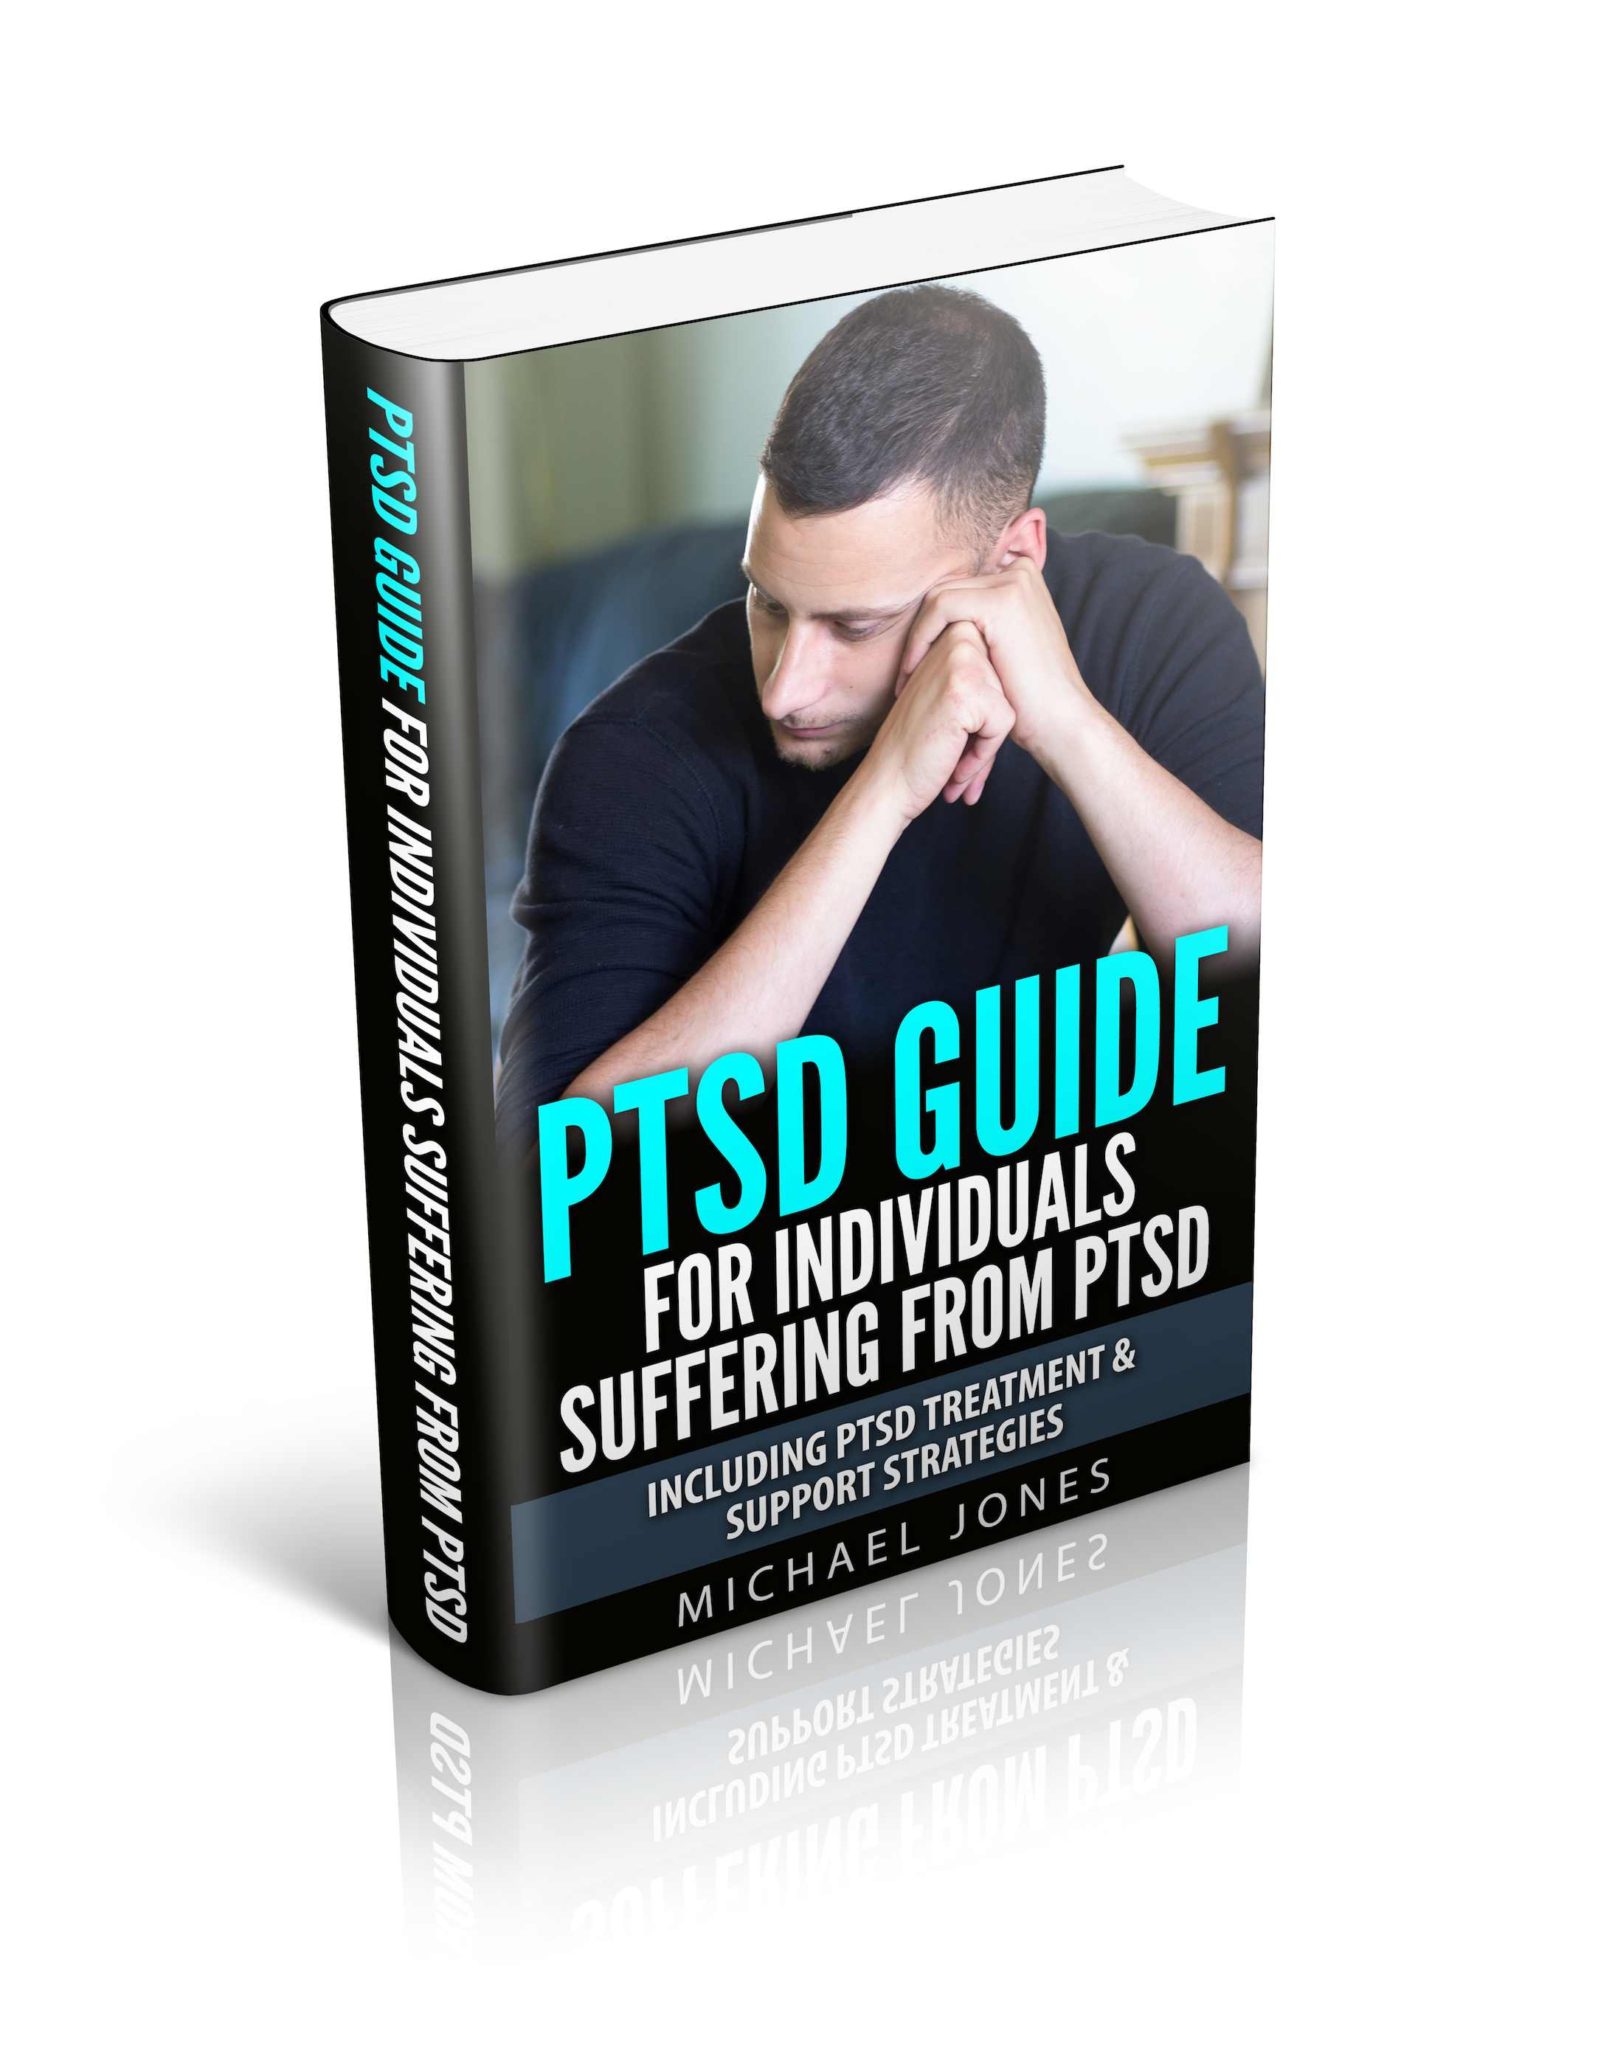 FREE: PTSD Guide For Individuals Suffering From Post Traumatic Stress Disorder: Including PTSD Treatment & Support Strategies by Michael Jones